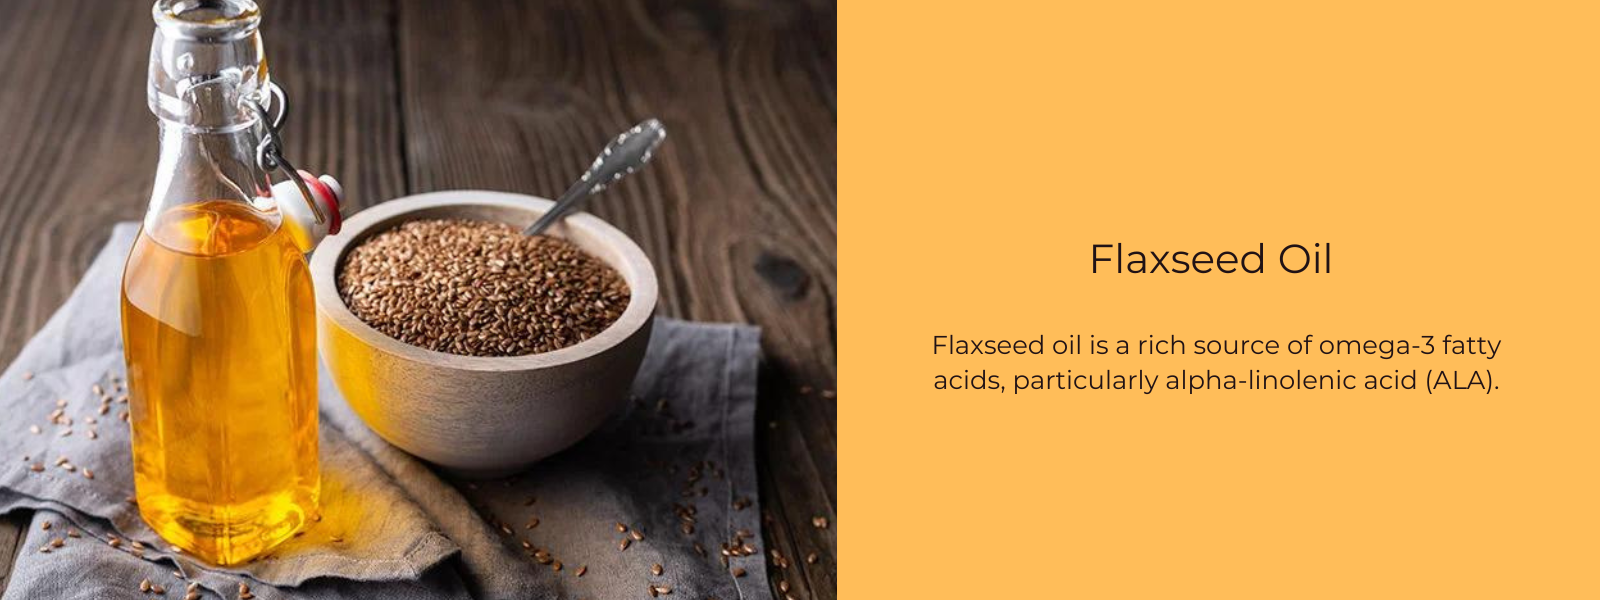 Flaxseed Oil - Health Benefits, Uses and Important Facts